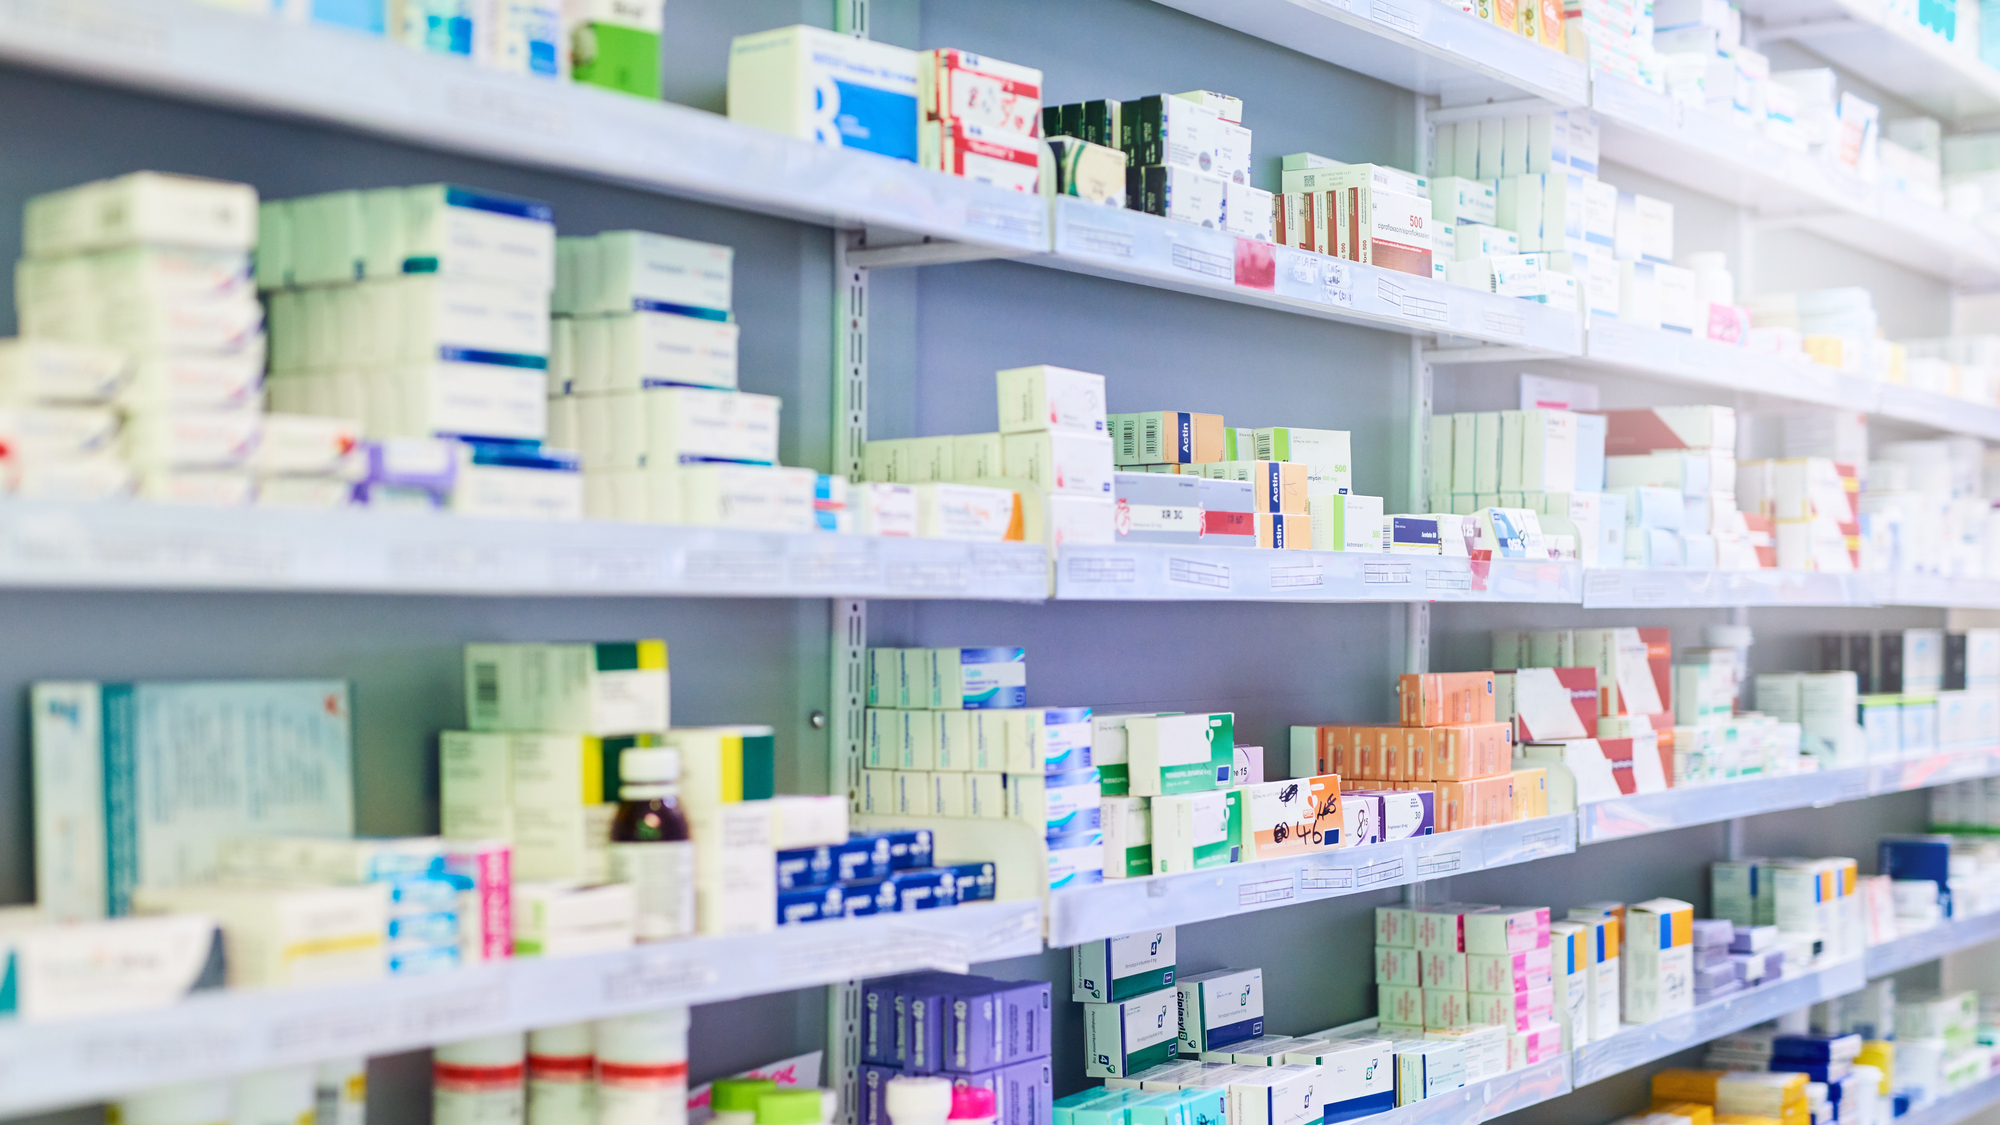 Pharmacy shelves stocked with medications